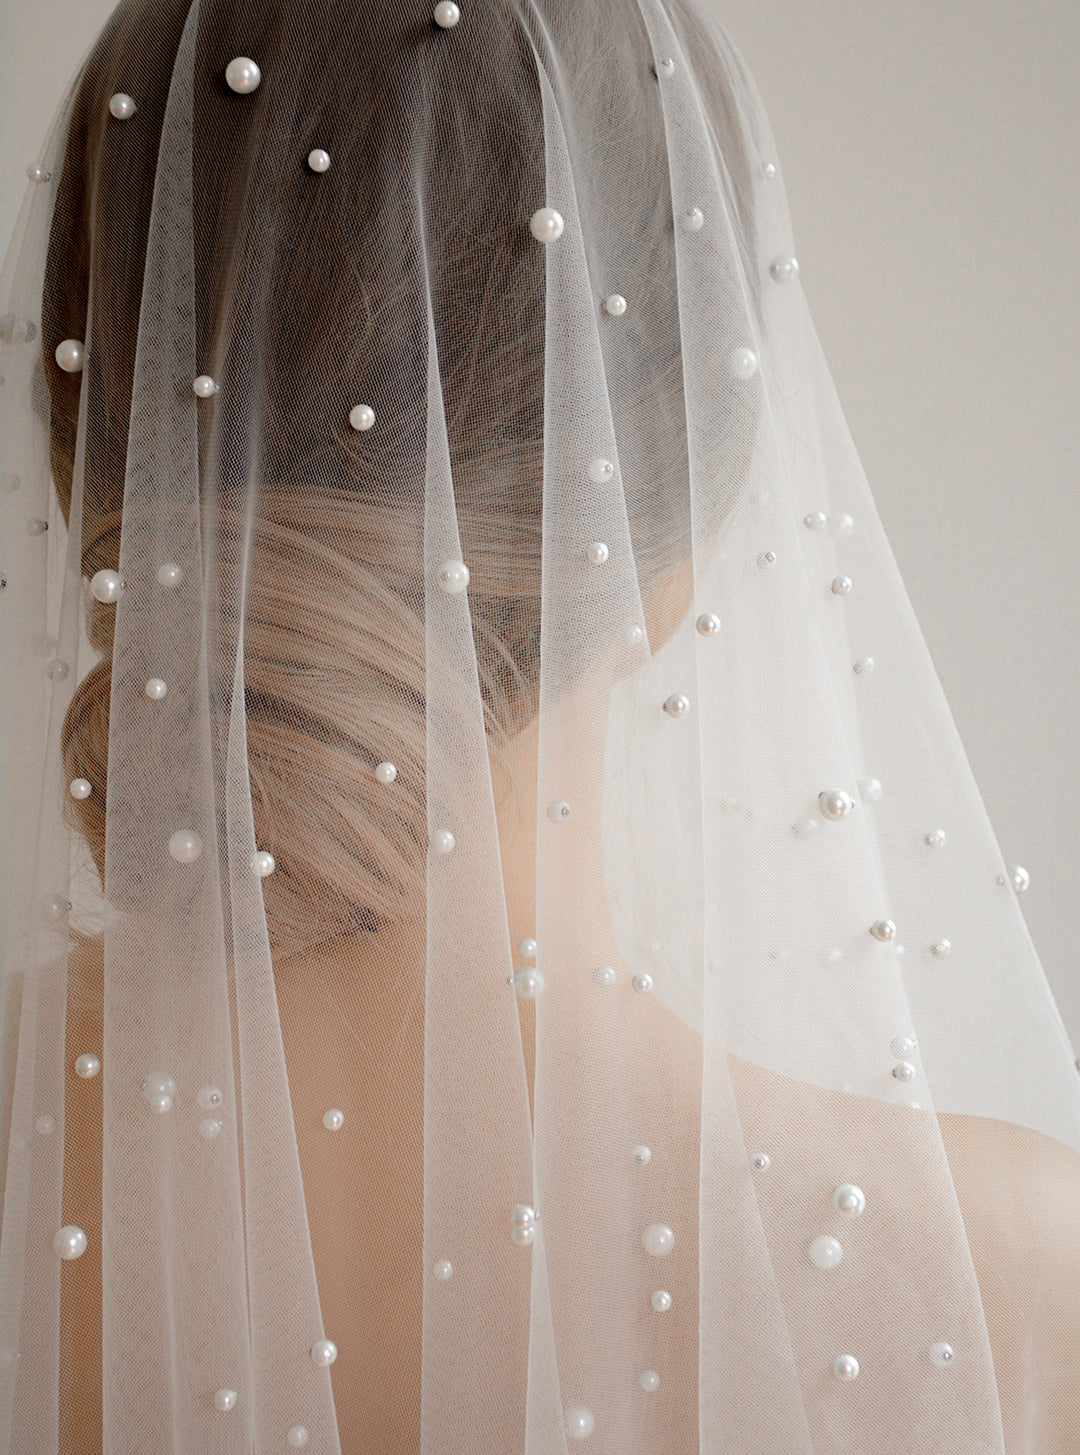 Pearl veil styled with an updo.